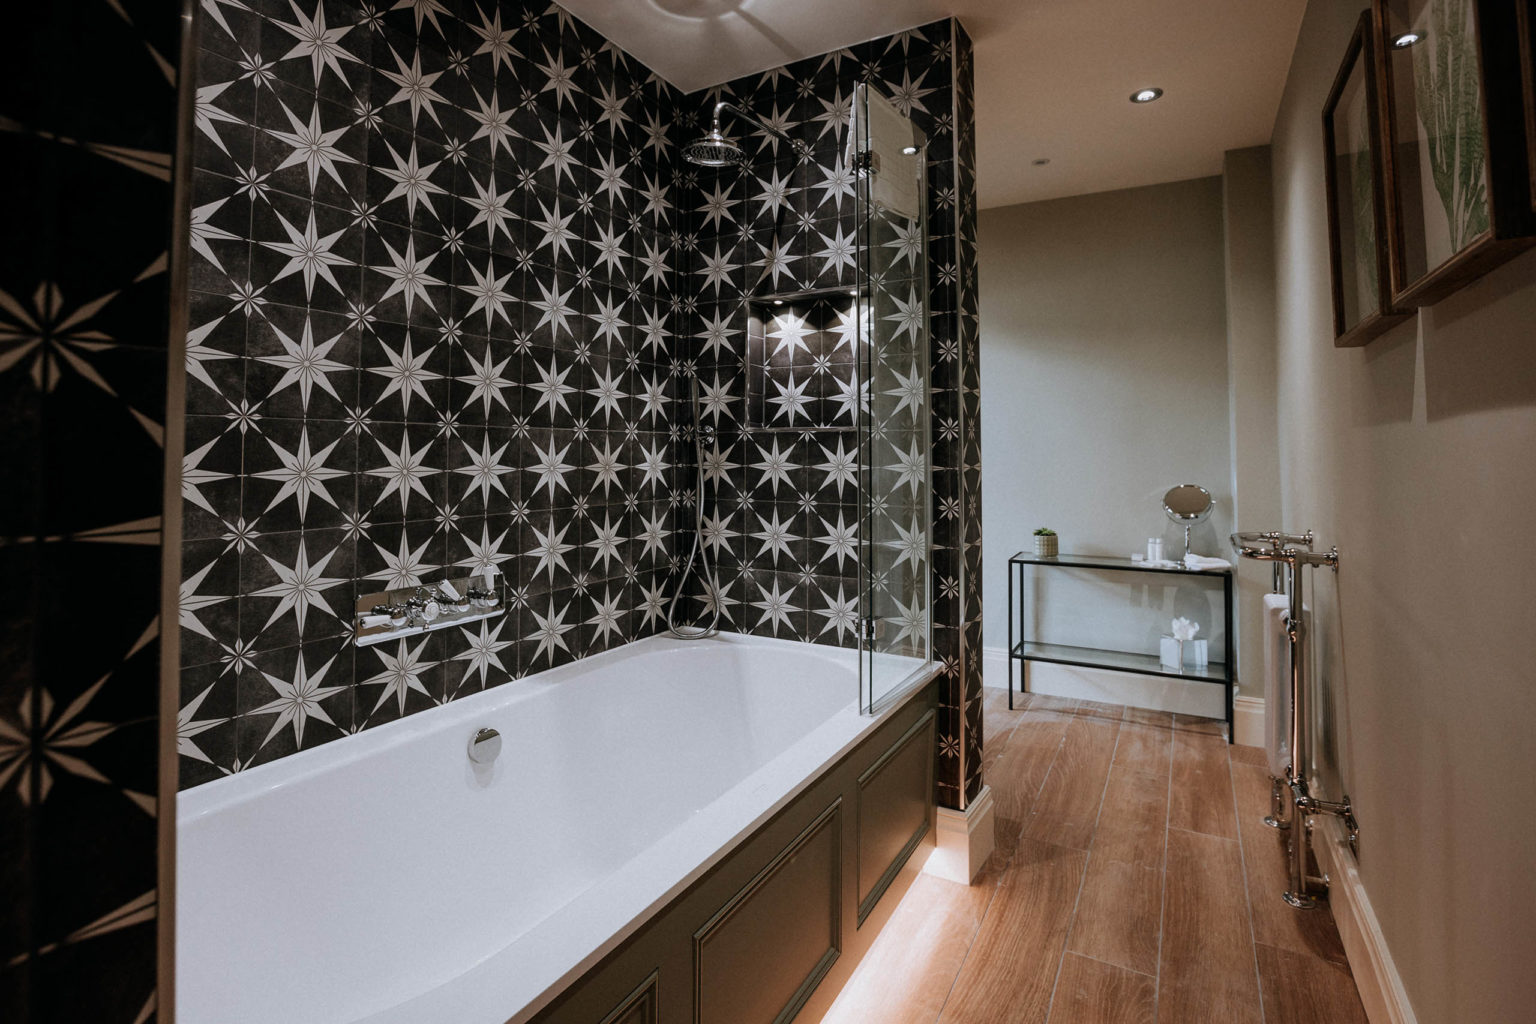 The bathroom of the Nutwith Baroness room at Swinton Park Hotel in North Yorkshire